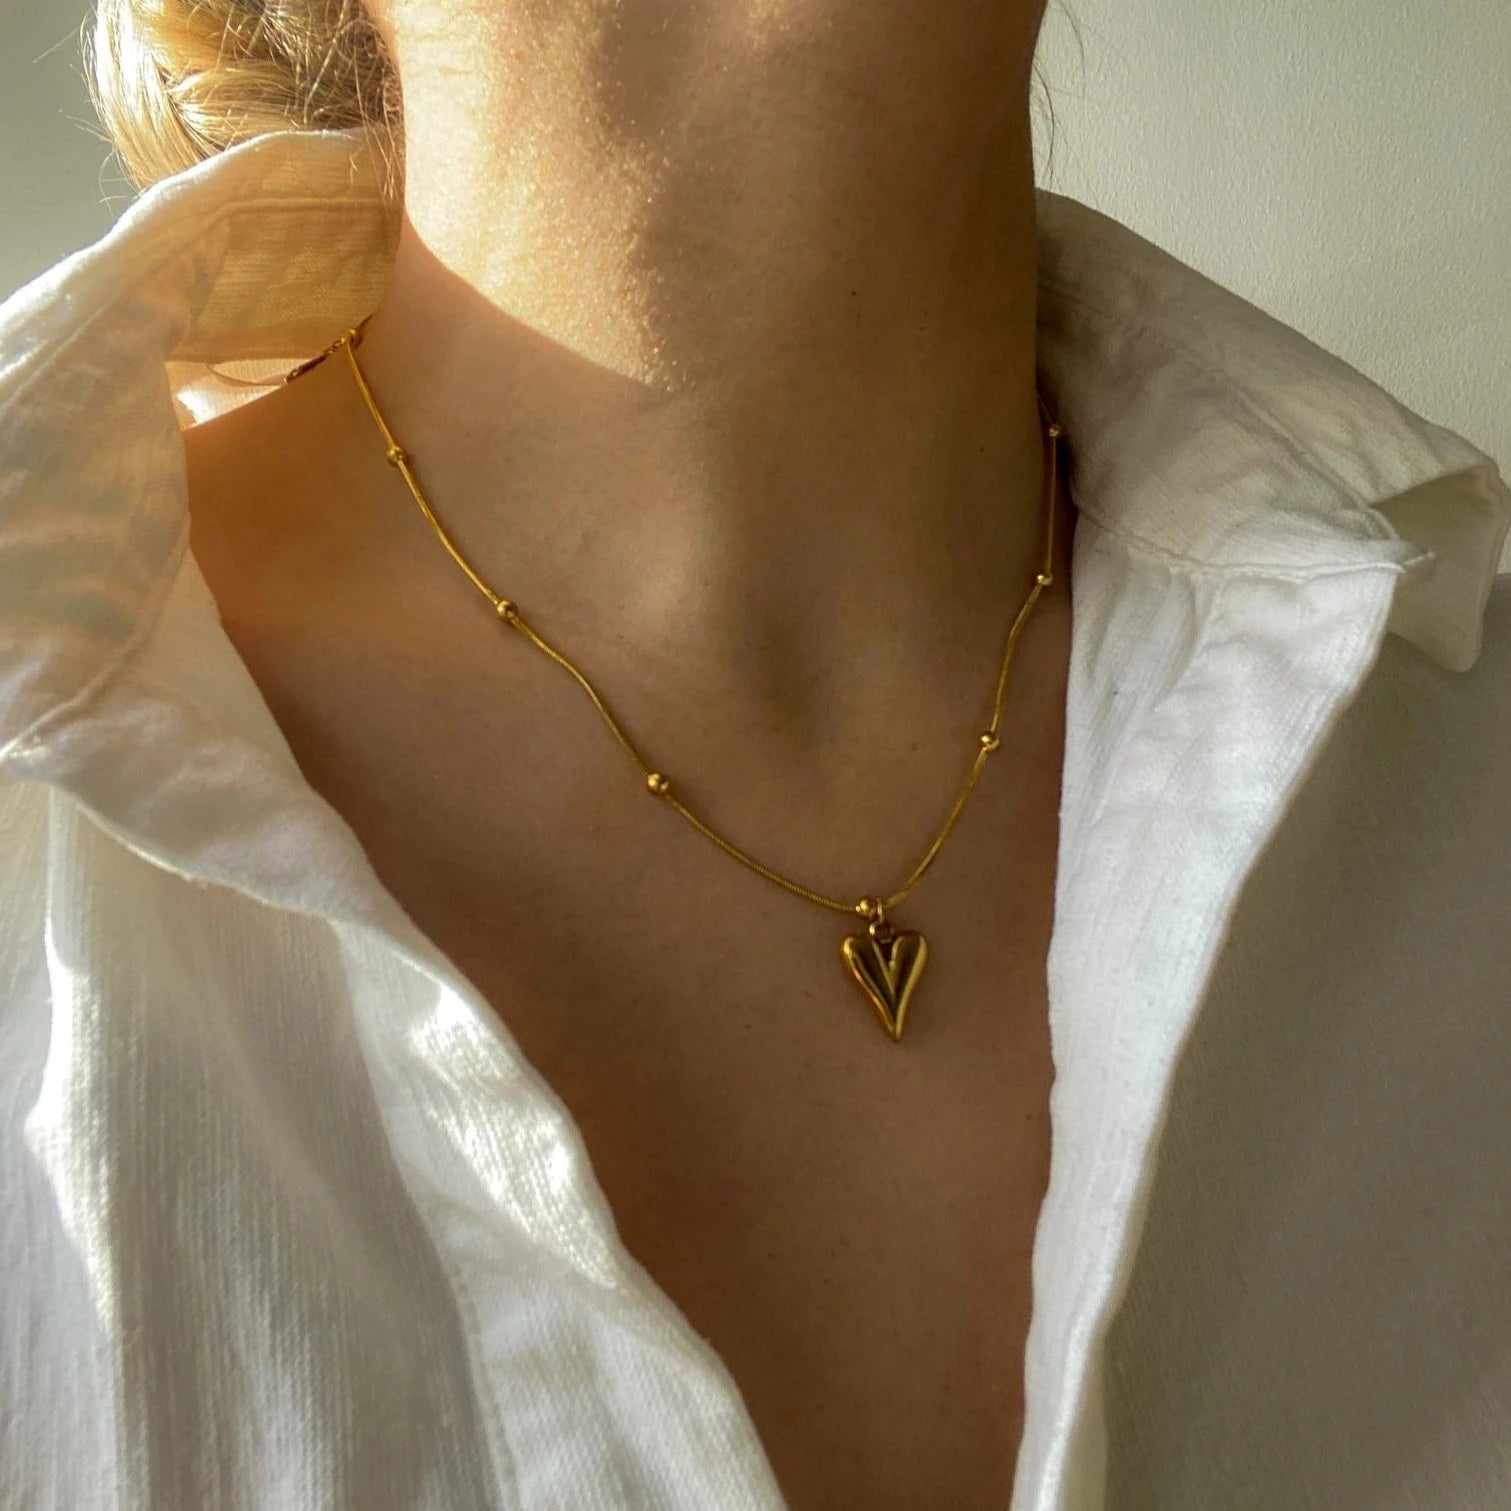 Heart Chain Necklace - Transform your look with the effortless glamour of this heart pendant necklace, a versatile piece that transitions seamlessly from day to night.